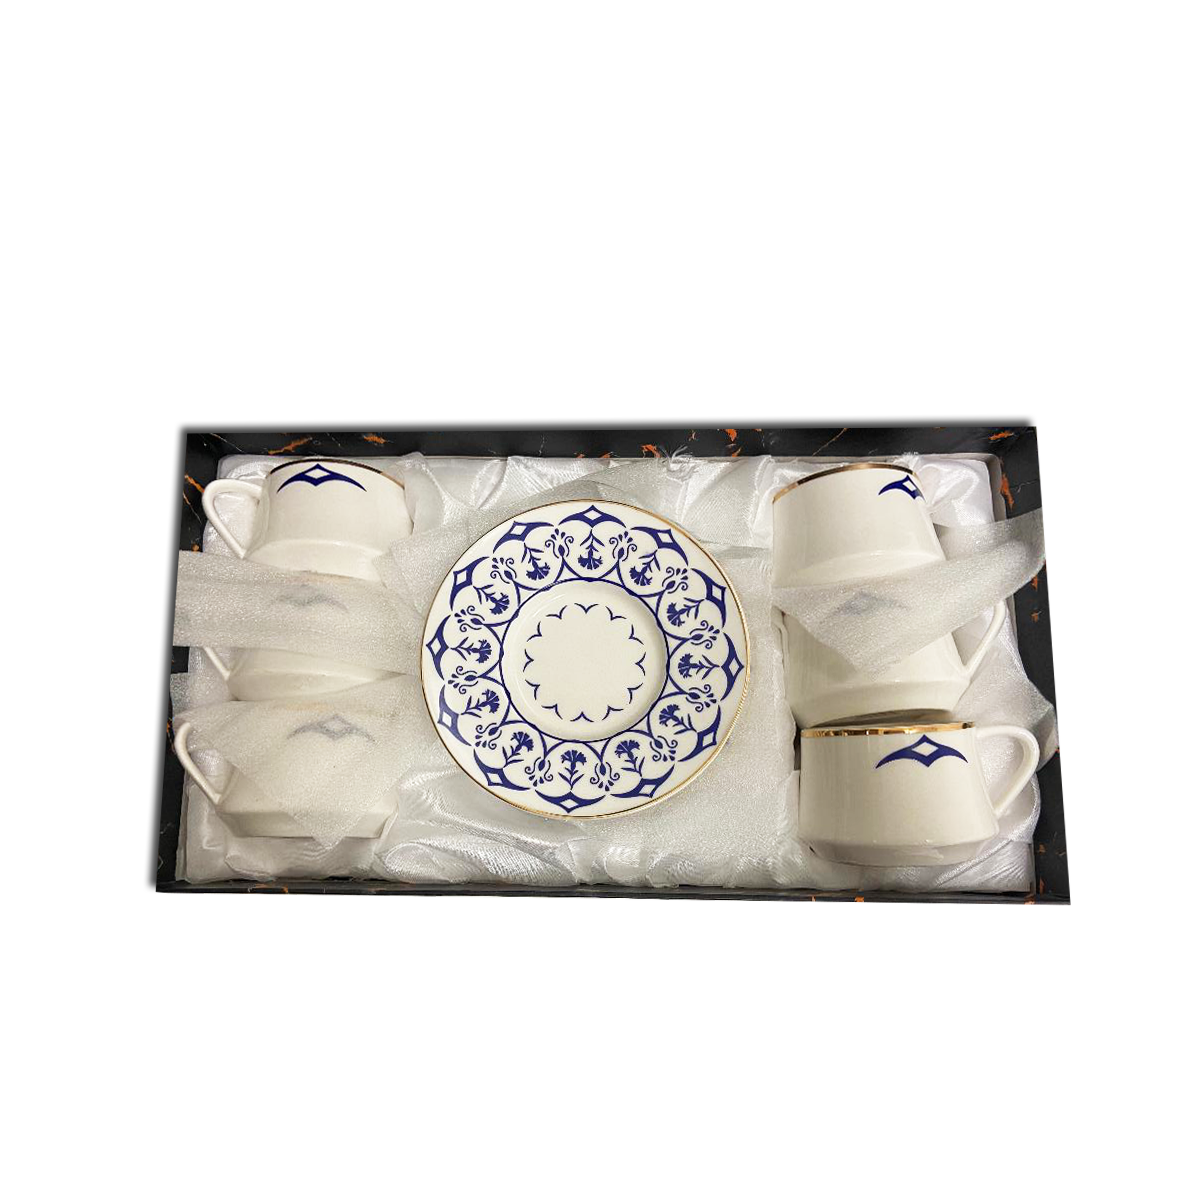 12 PC White & Blue Coffee Cup and Saucer